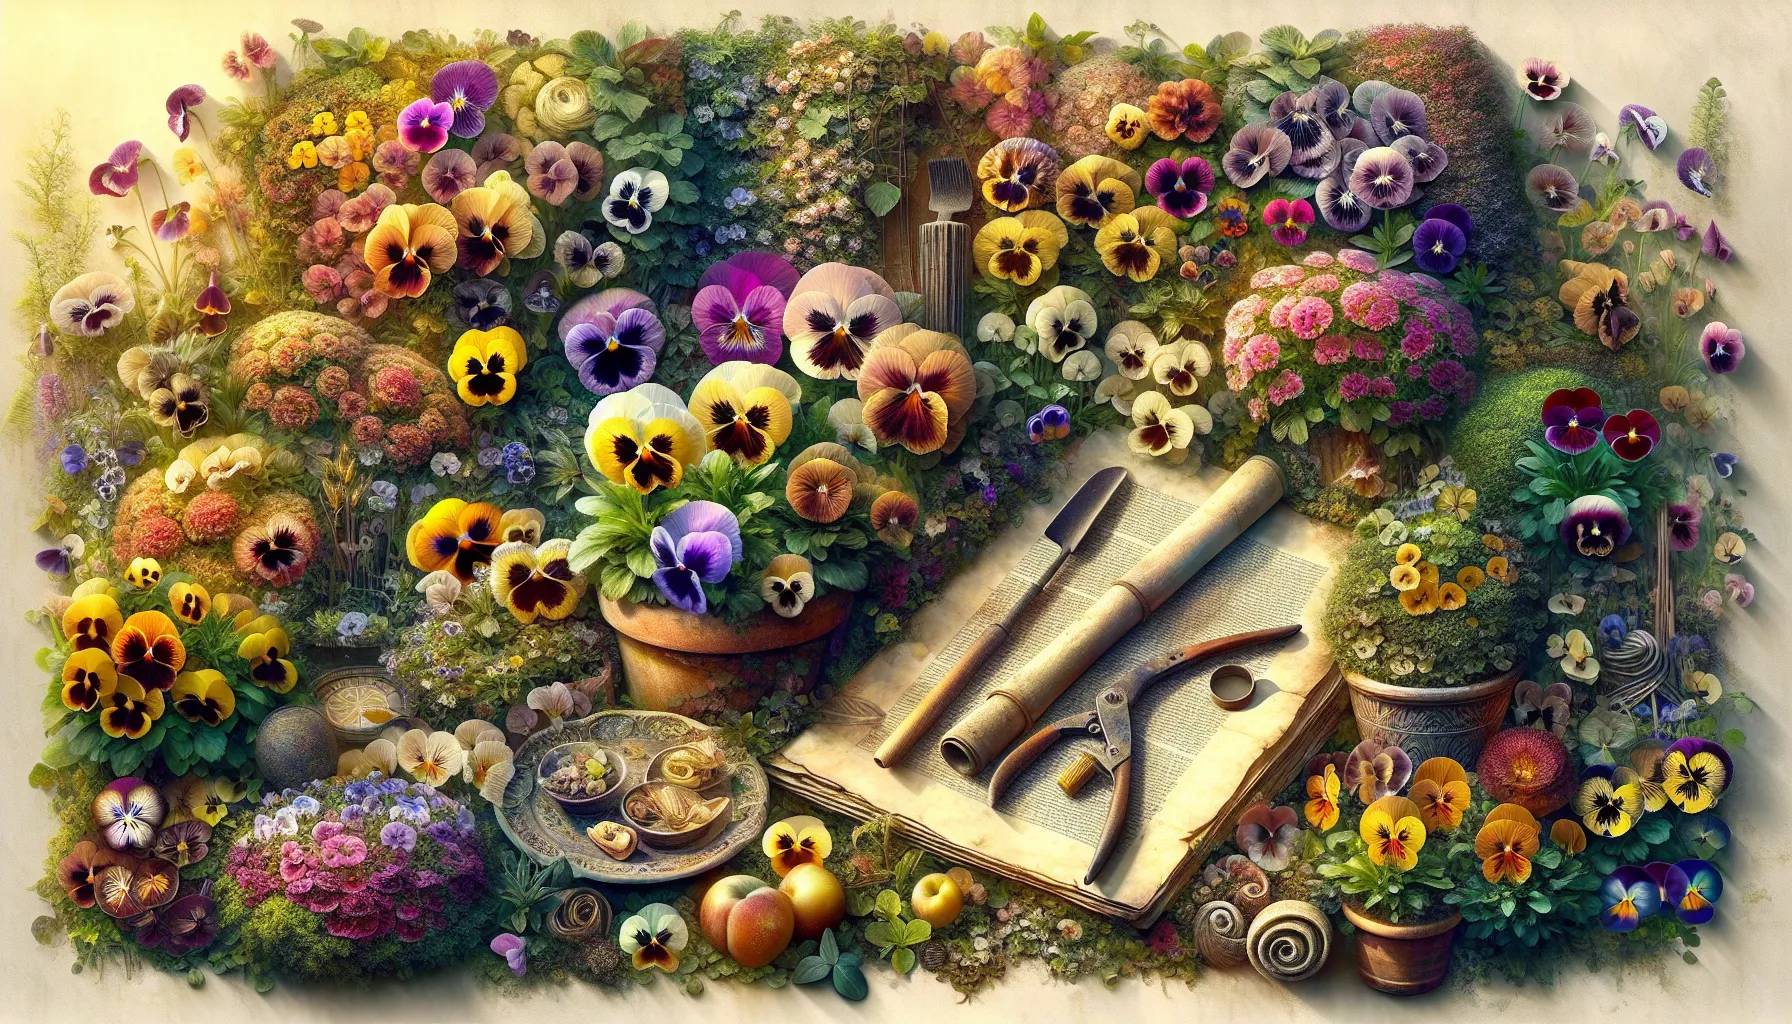 A vibrant and whimsical arrangement of various colored pansies, embodying the pansy meaning flower of thoughtful contemplation, surrounds antique gardening tools and a book.